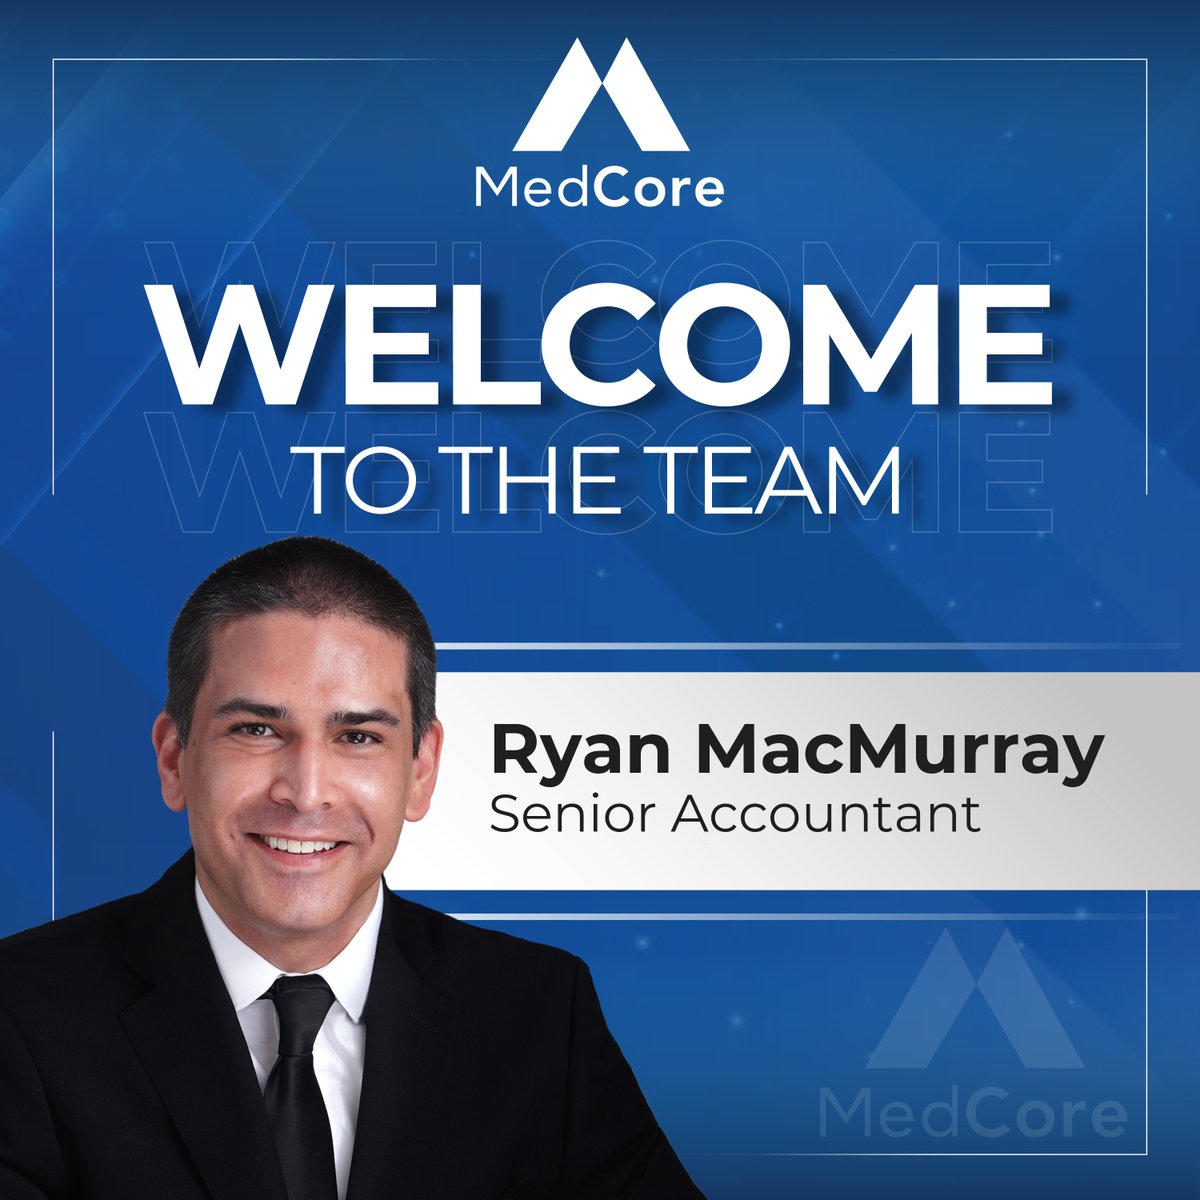 Big things keep happening at the MedCore Corporate Offices!  We are pleased to announce the newest addition to our accounting team!  Welcome to MedCore Ryan MacMurray!  

#MedCorePartners #WelcomeToTheTeam #HealthcareRealEstate #MedicalRealEstate #CRE #TeamworkMakesTheDreamWork